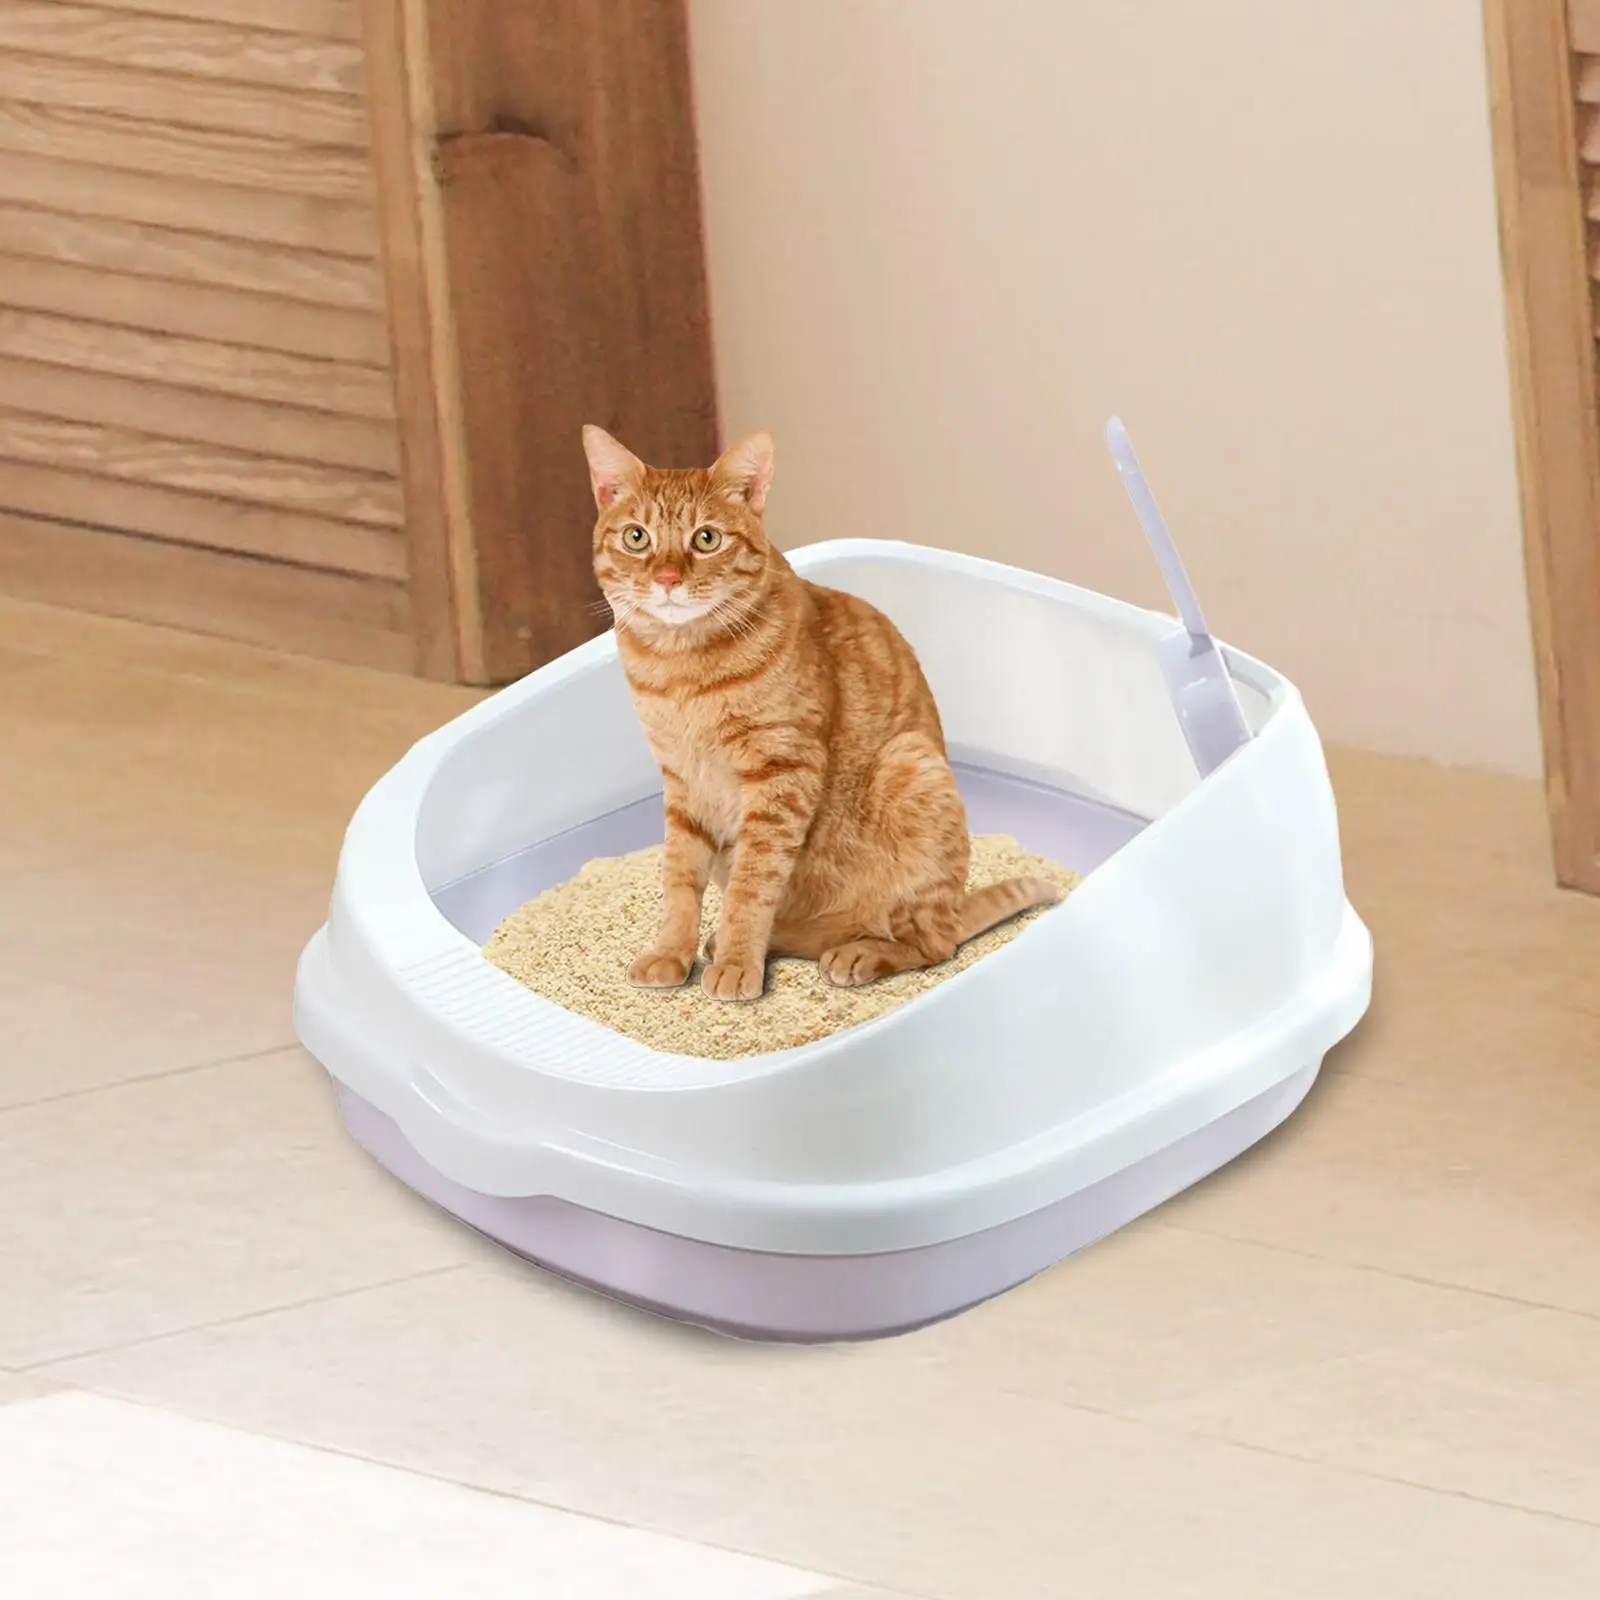 Pet Cat Litter Box Toilet Durable Semi Closed Sand Box Large Space Detachable Easy Clean Splashproof Tray for Kitten Accessories